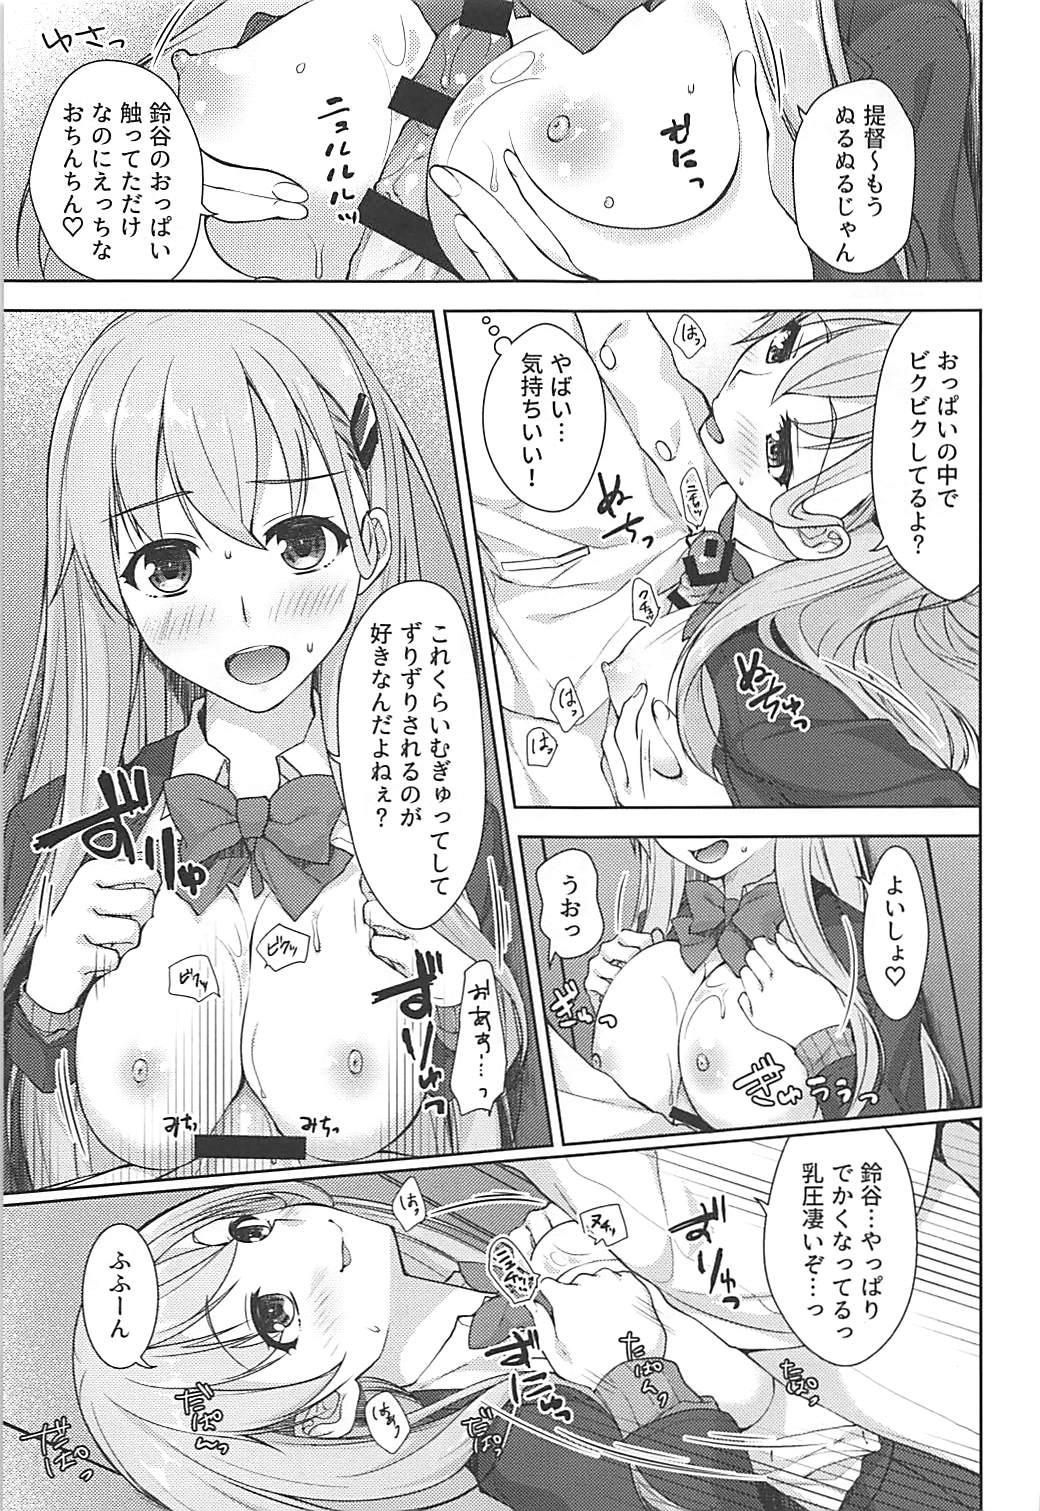 Buttfucking Second Virgin - Kantai collection People Having Sex - Page 6